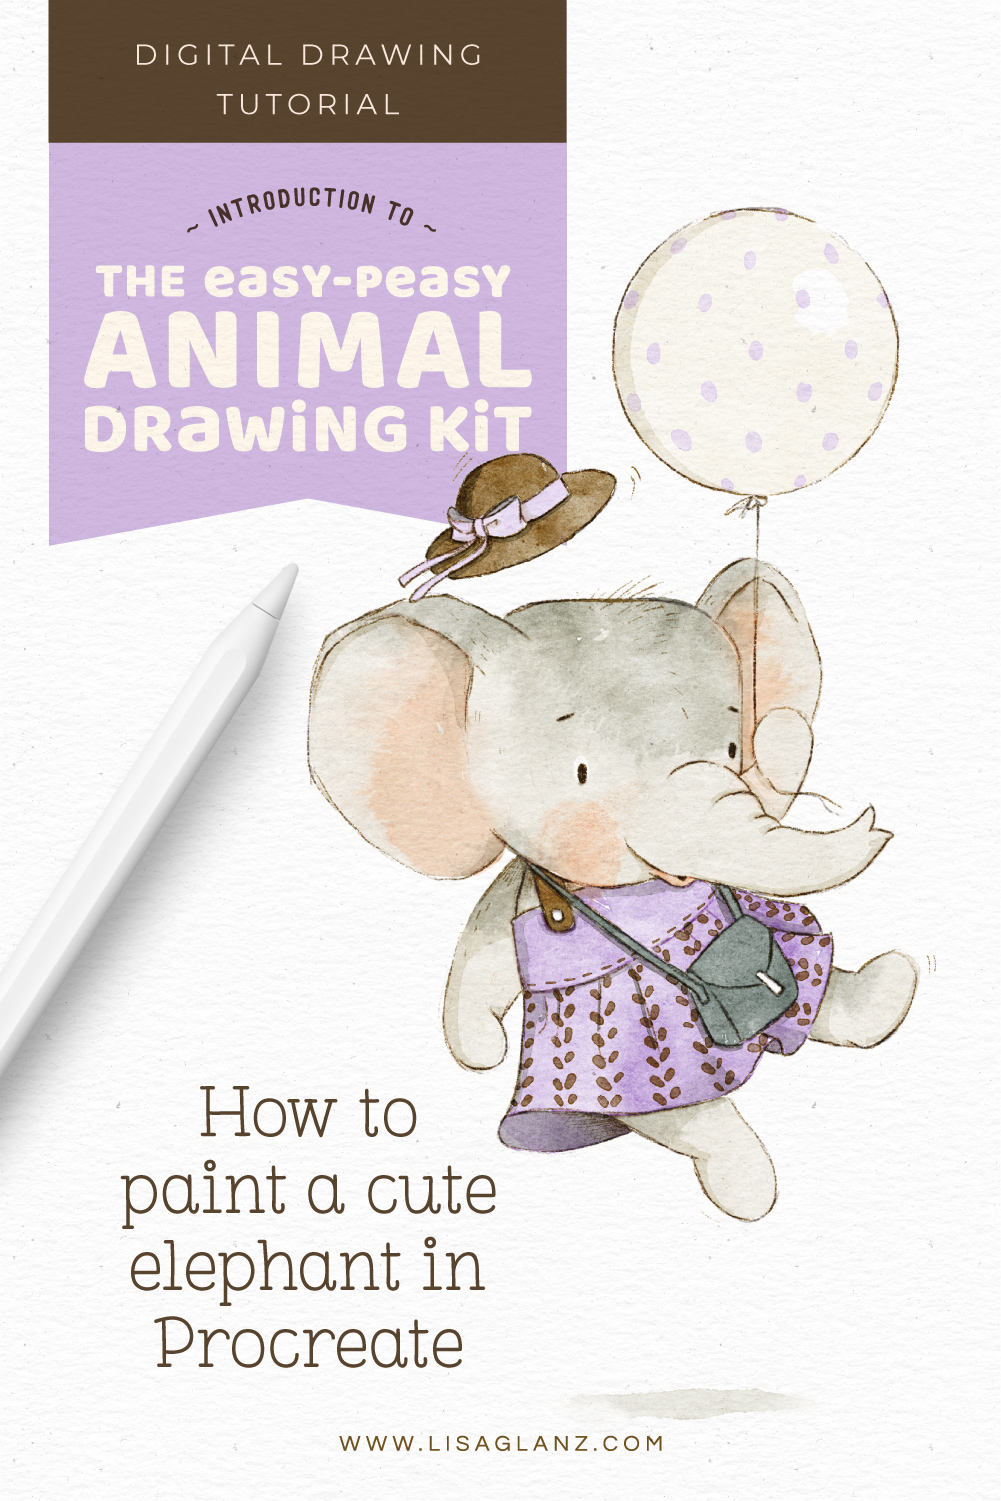 Drawing adorable animals is easy-peasy with the Animal Drawing Kit!